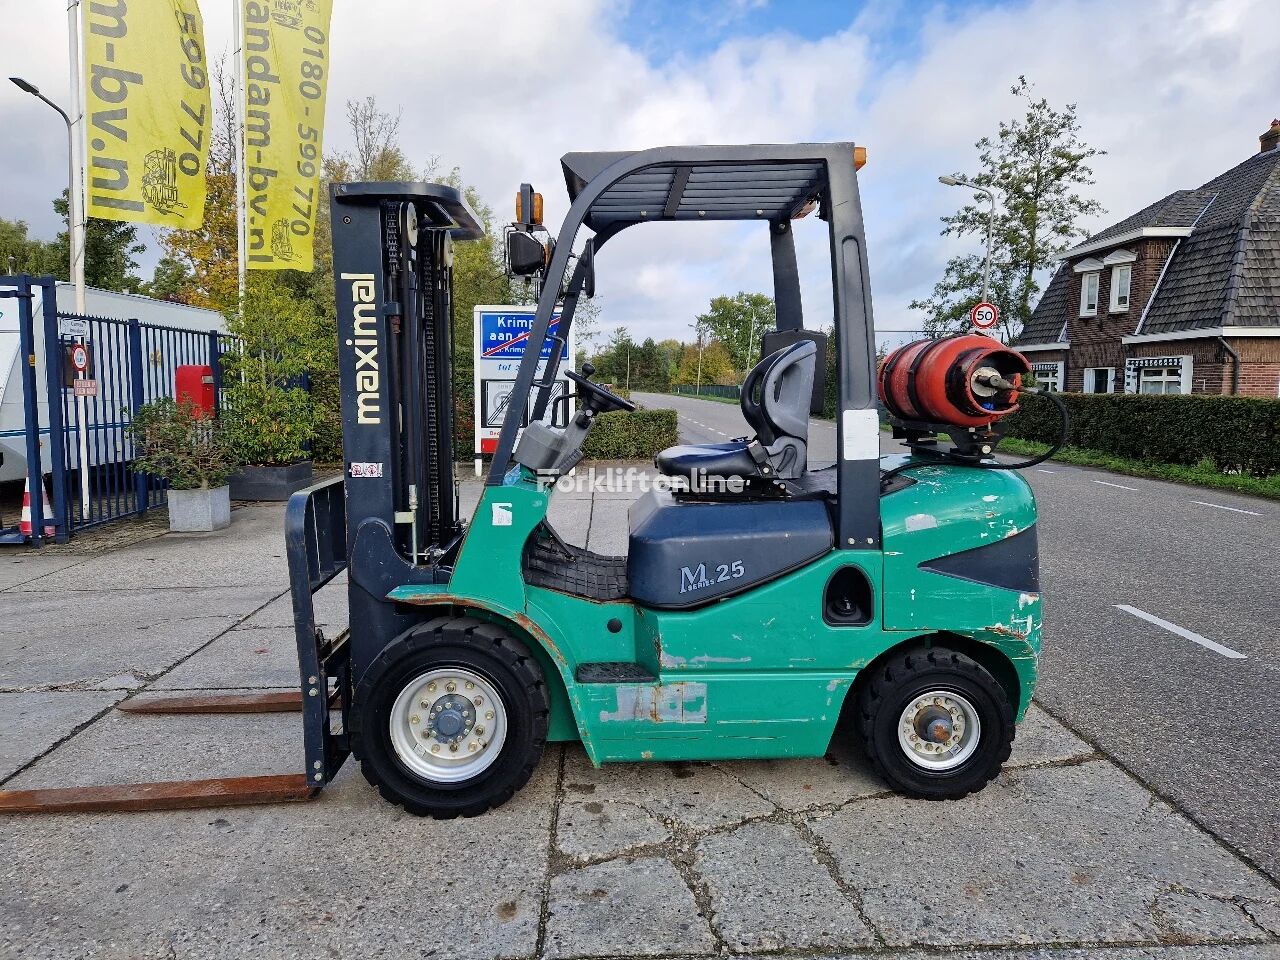 empilhador diesel Nissan Zhejiang Maximal with 1290 hours! 2.5 ton LPG